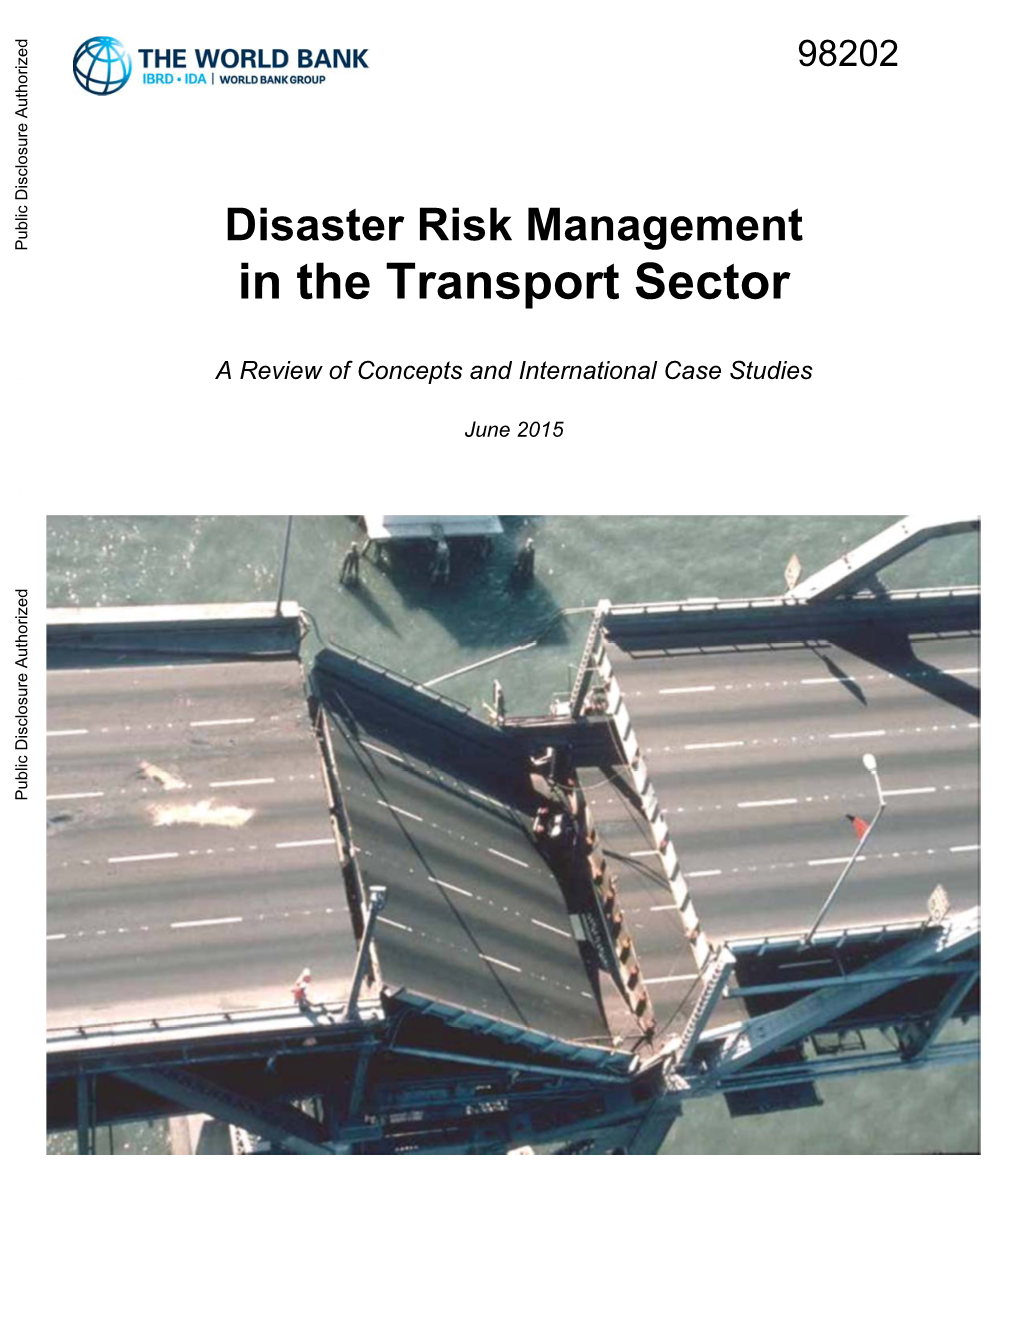 Disaster Risk Management Public Disclosure Authorized in the Transport Sector